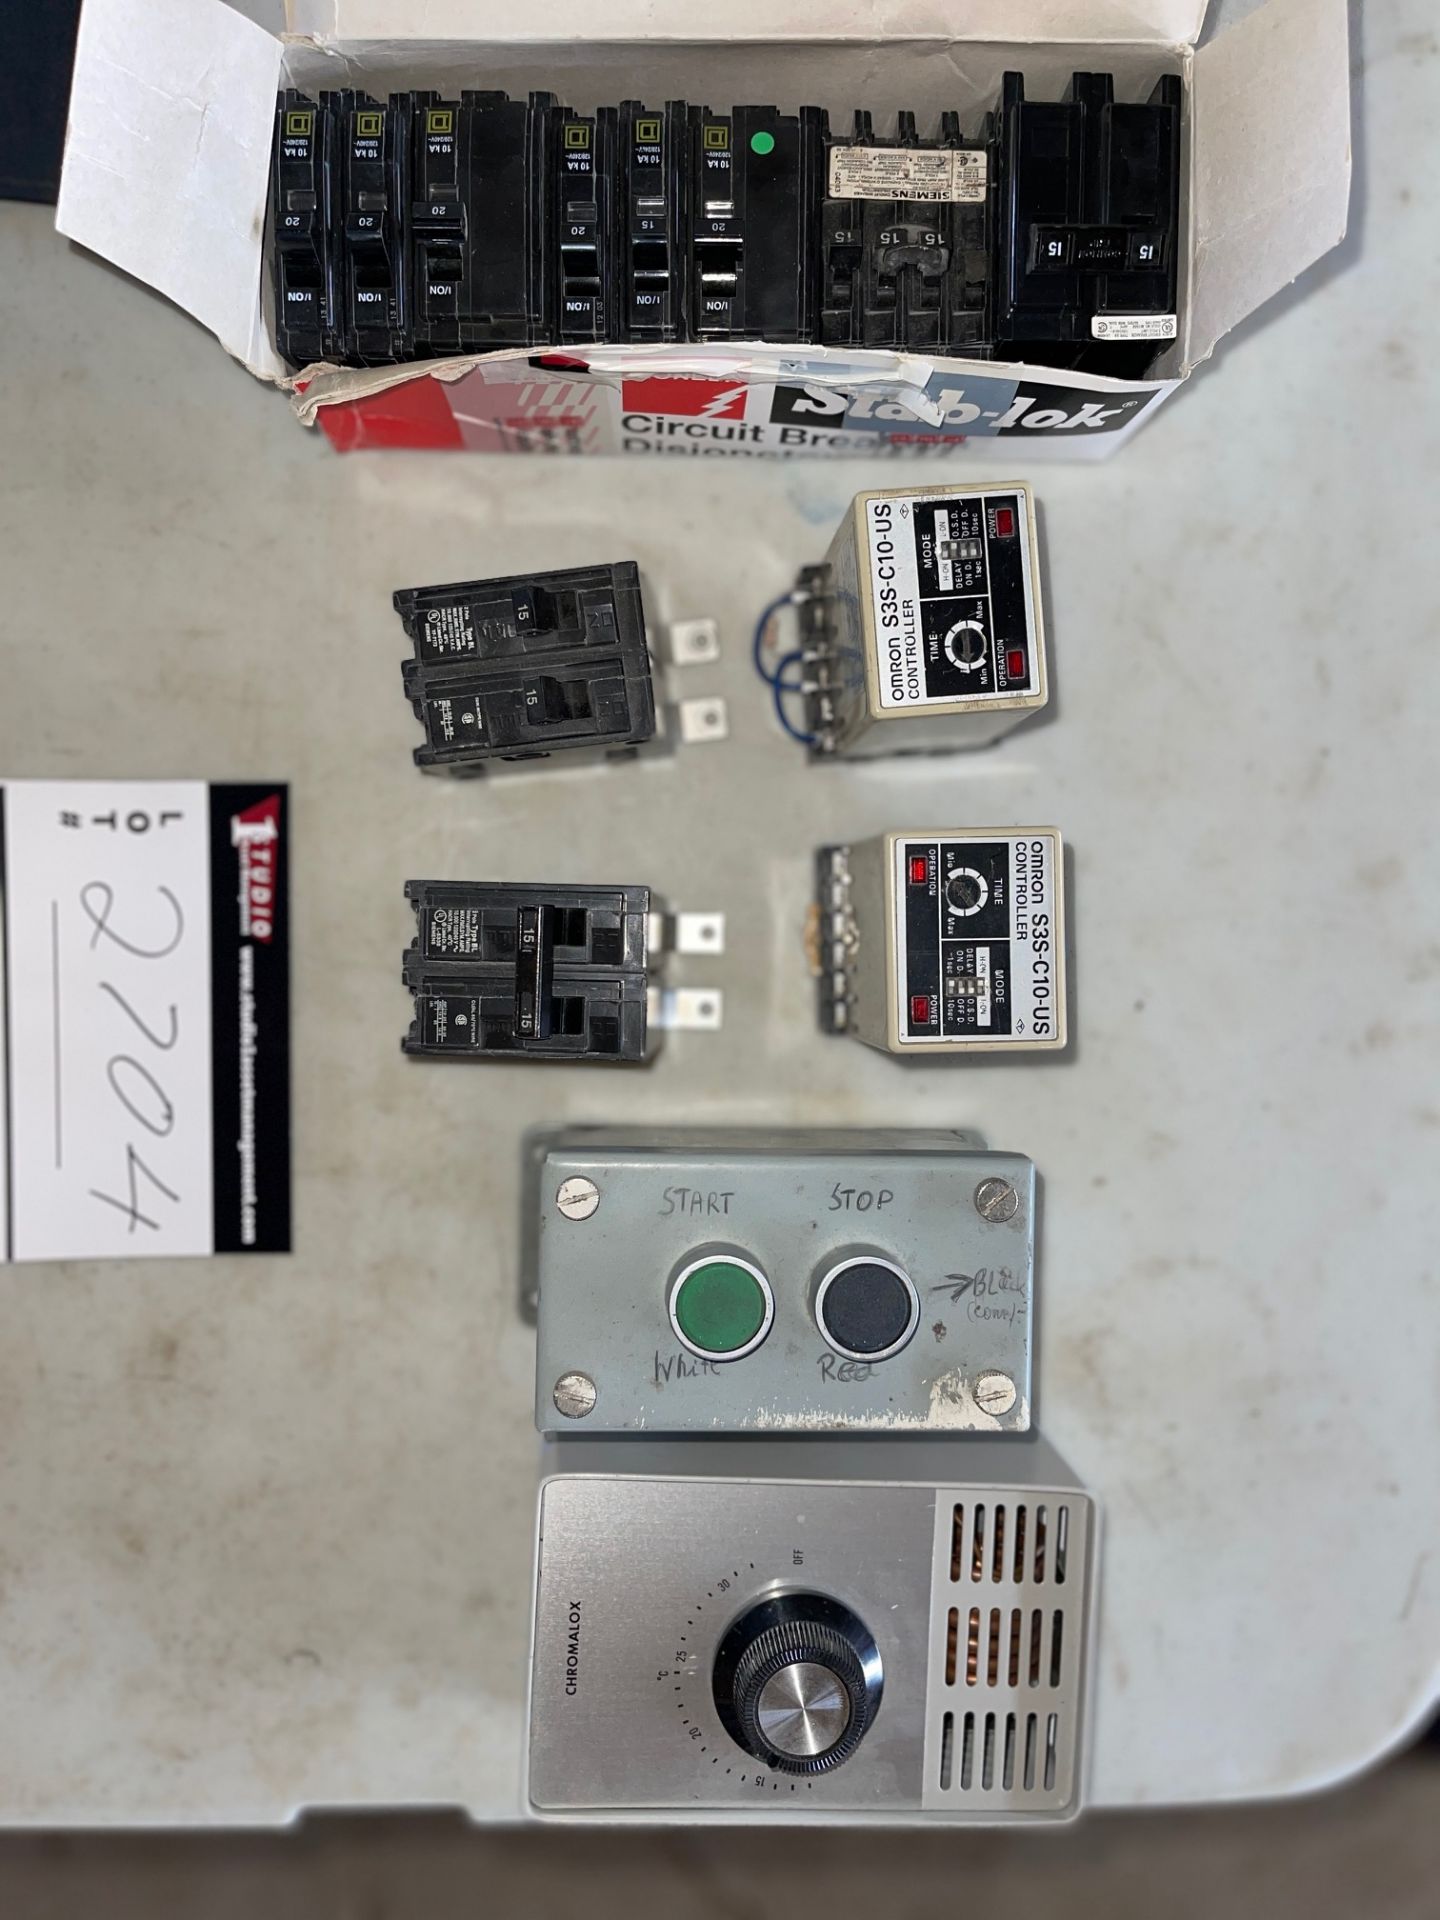 LOT/ OMRON AND CONTROLS, PN-SC3-C10-US, 120/240 INPUT, 5 AMP OUTPUT, CHROMALOX THERMOSTAT, SQUARE